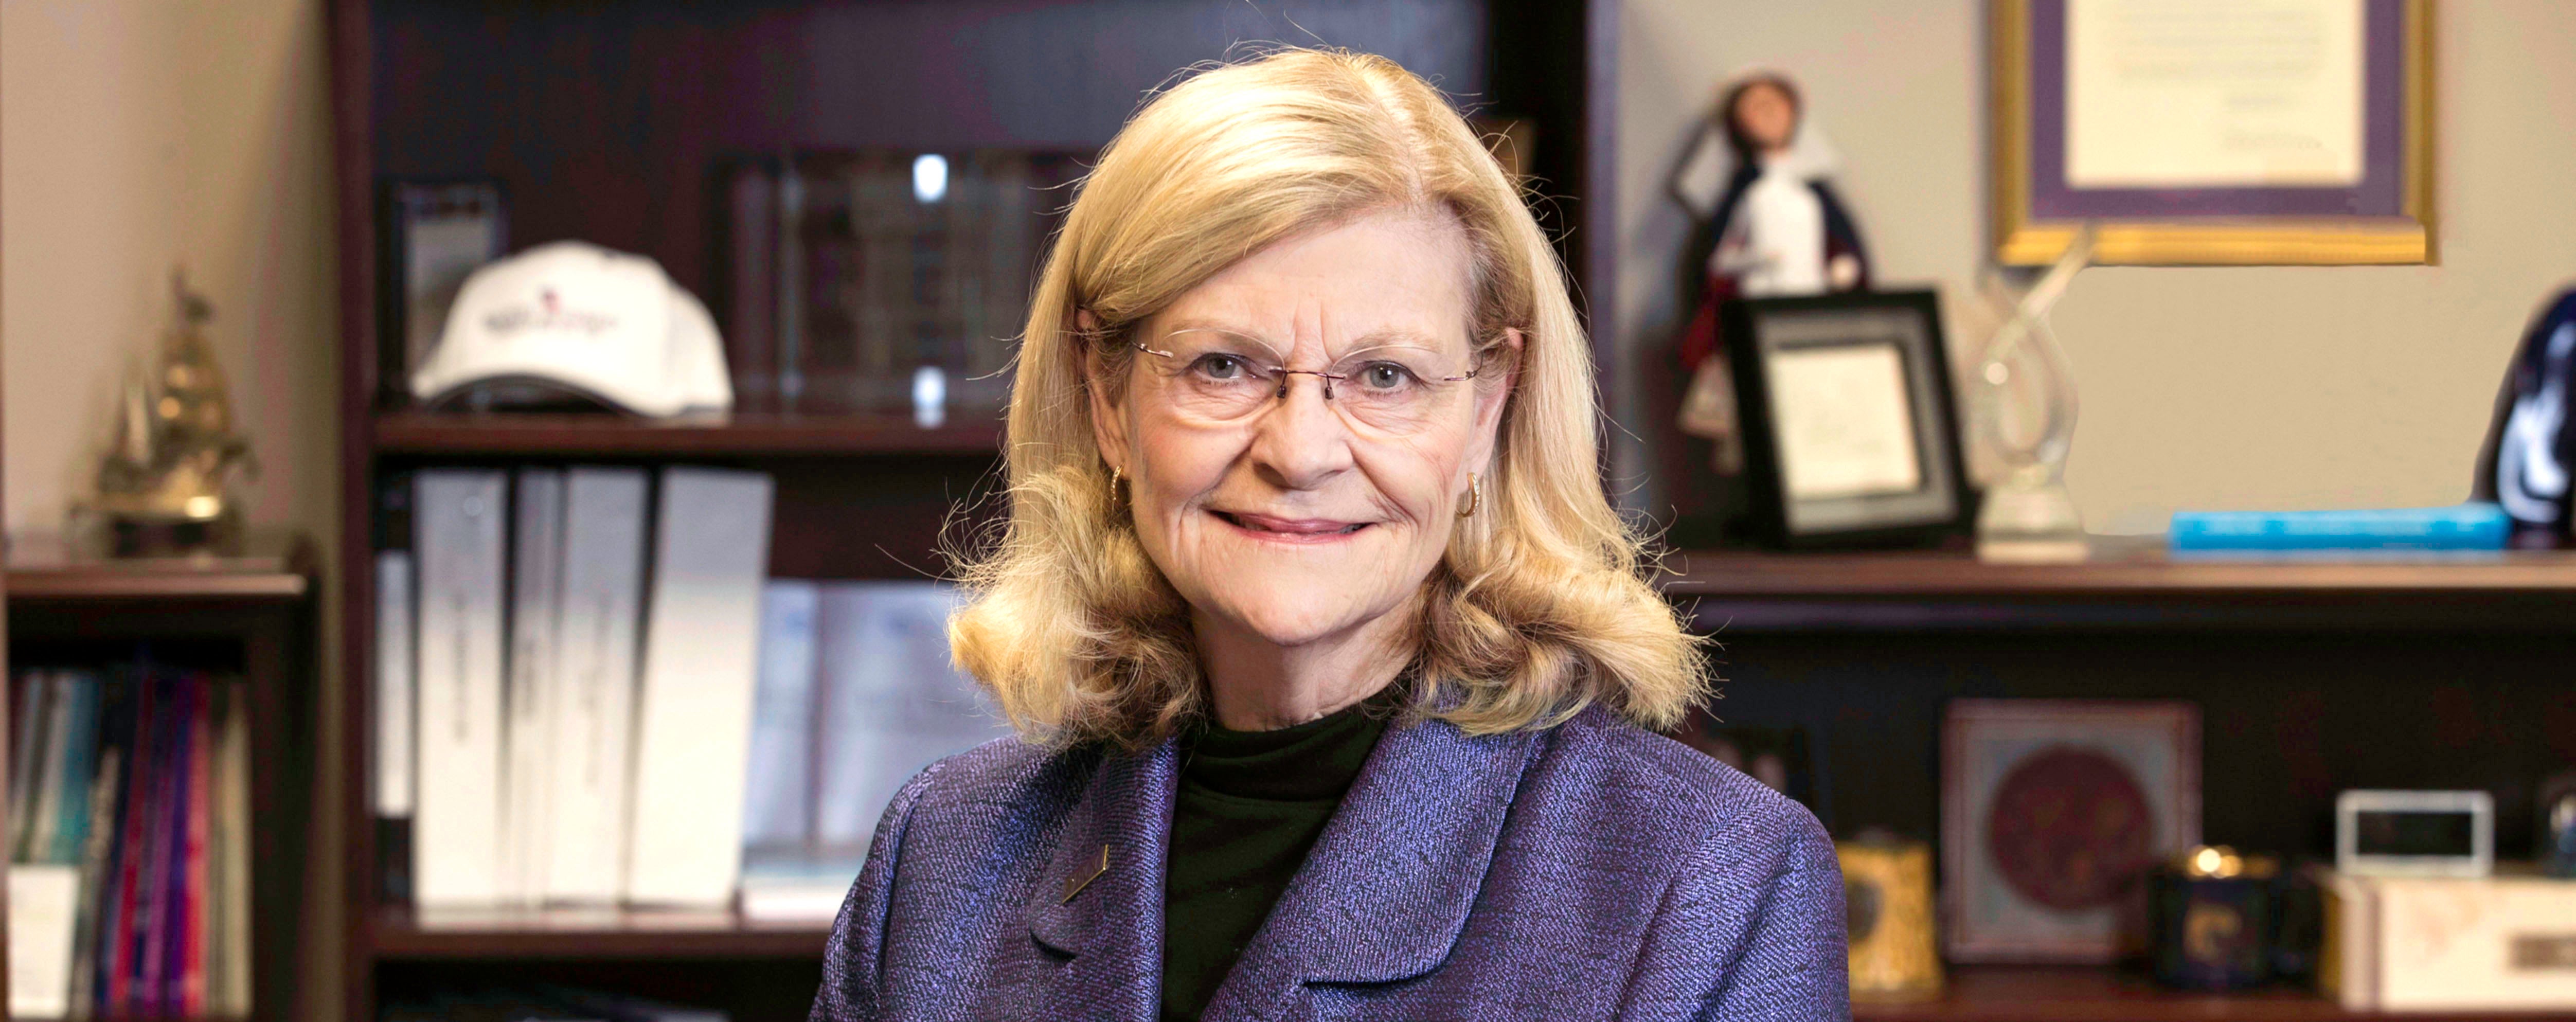 Dr. Phyllis Horns, vice chancellor of the health sciences division, will step down after nearly 10 years in the role.